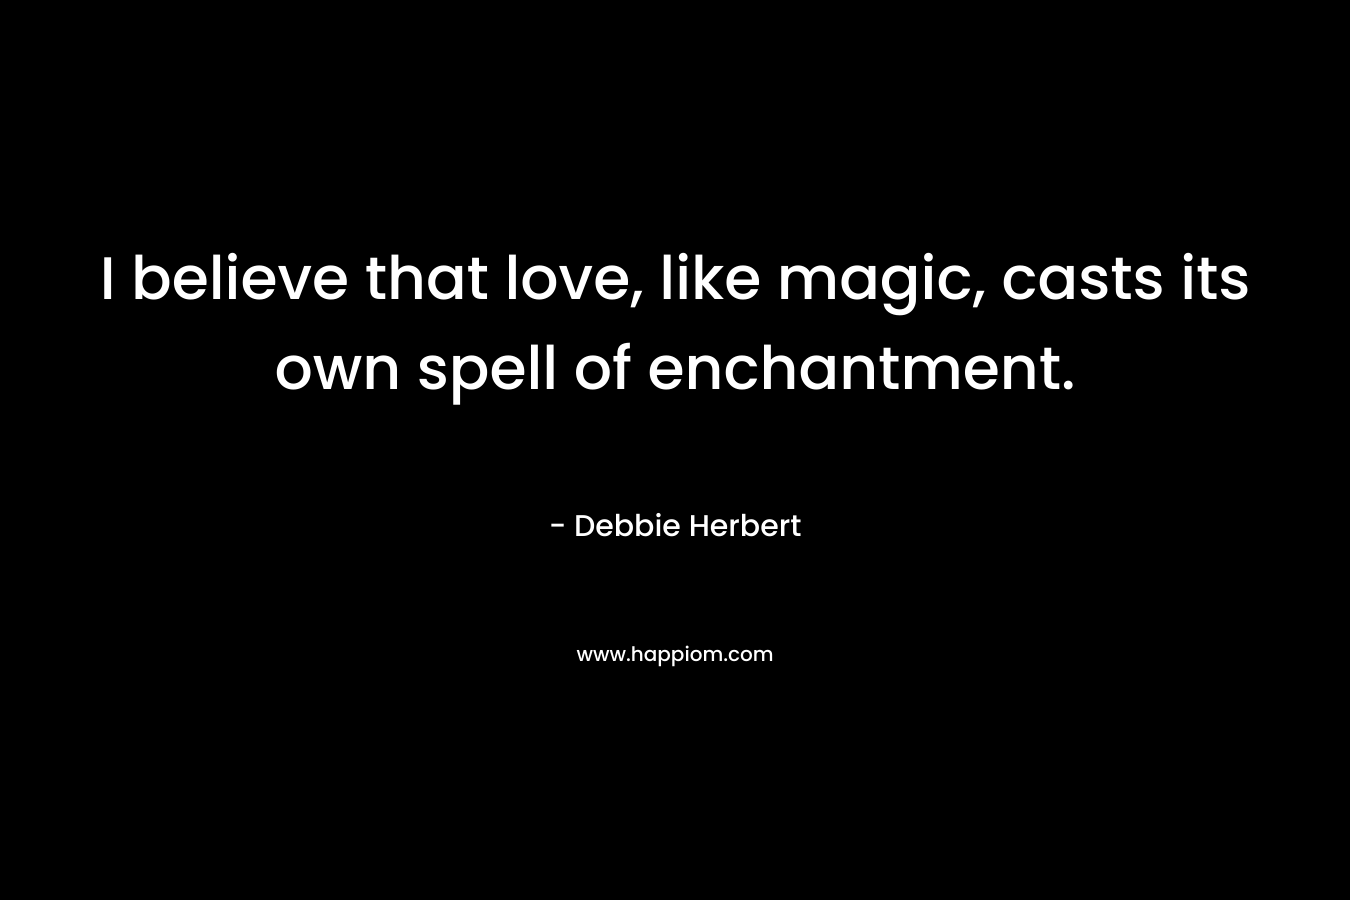 I believe that love, like magic, casts its own spell of enchantment. – Debbie Herbert